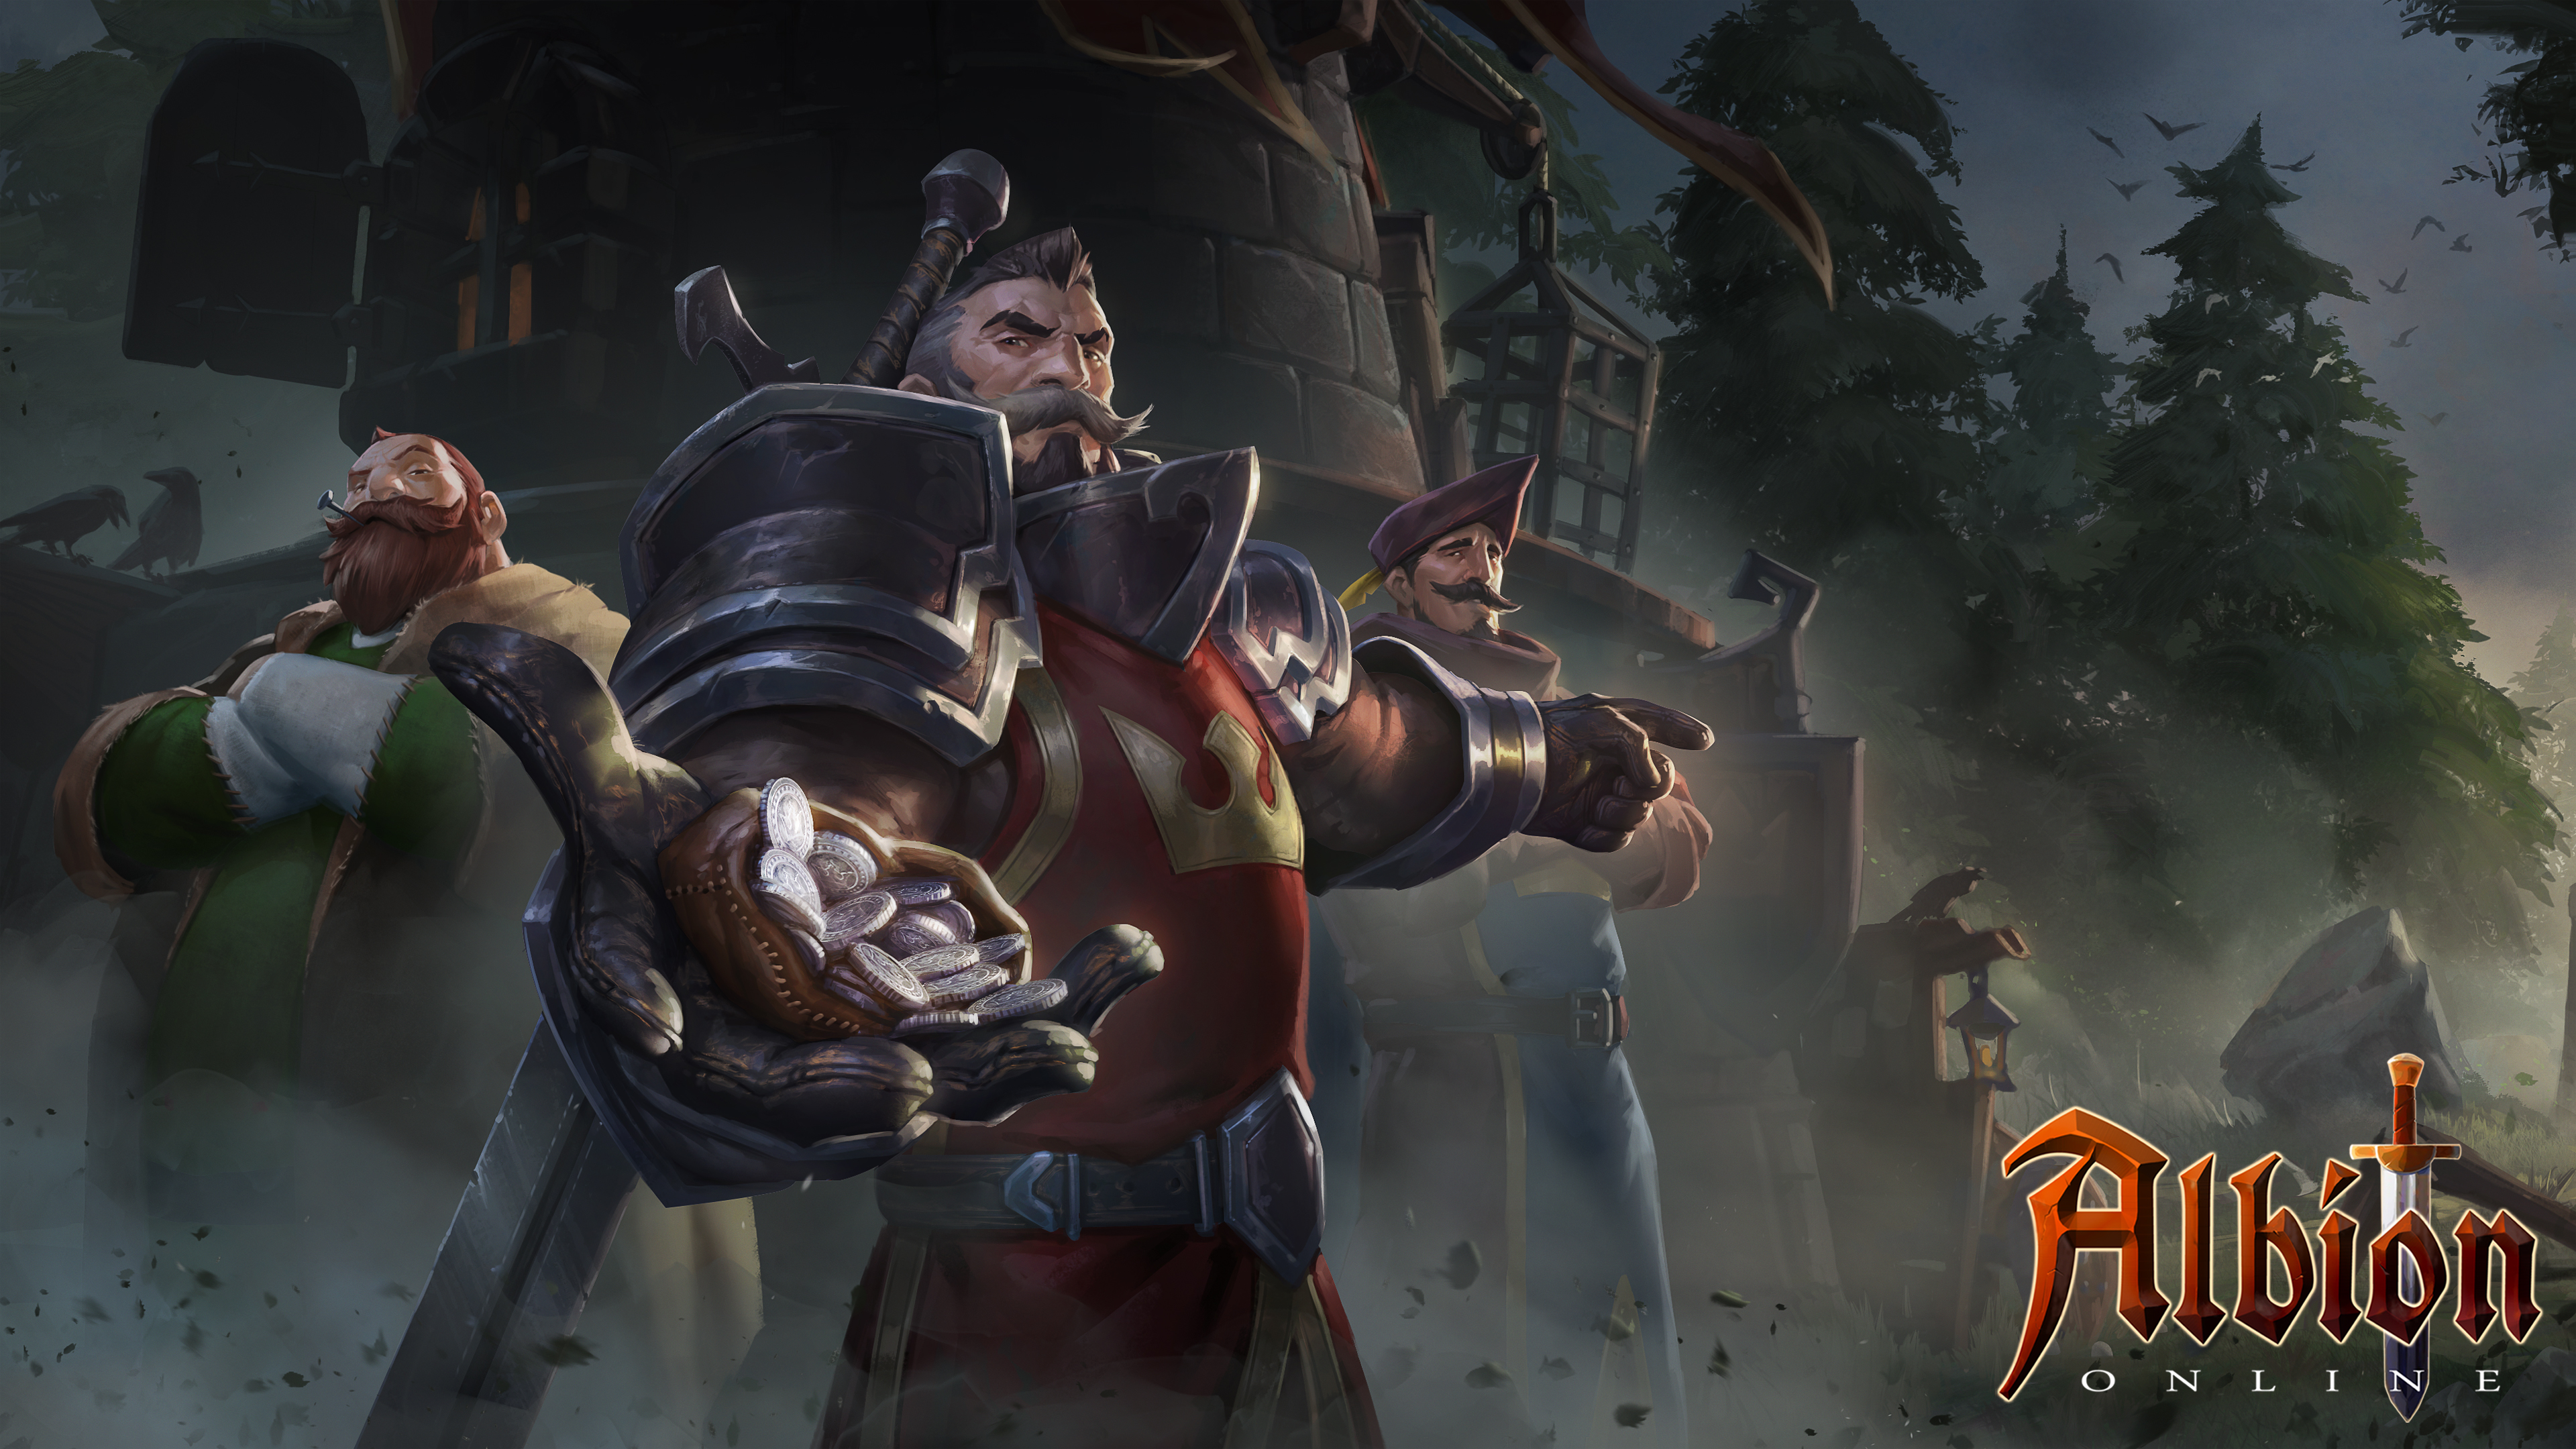 Video Game Albion Online HD Wallpaper | Background Image